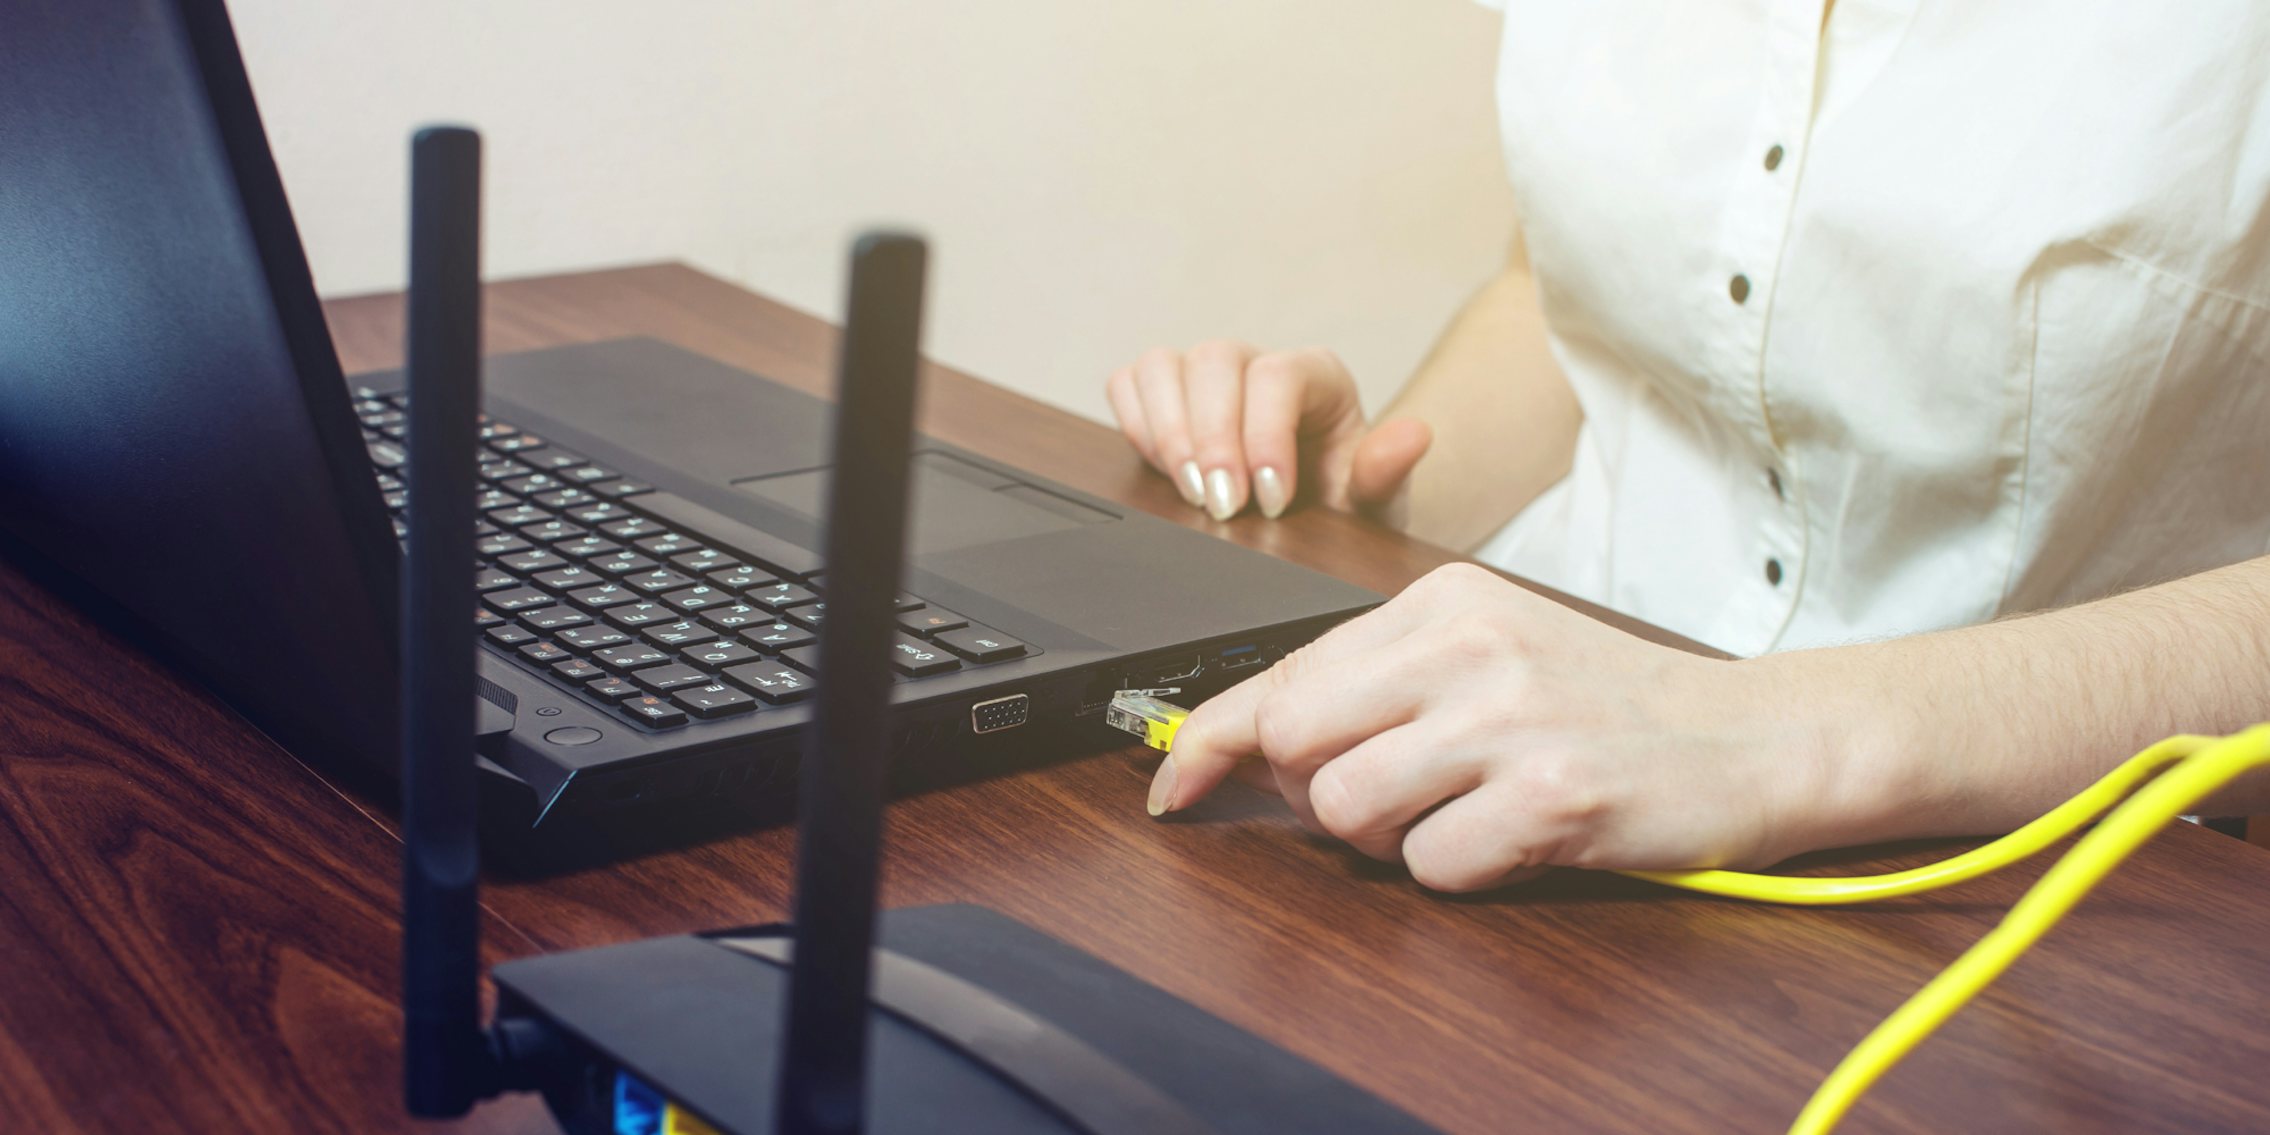 A woman connecting an ethernet cord into her laptop, attempting to get better broadband internet service.